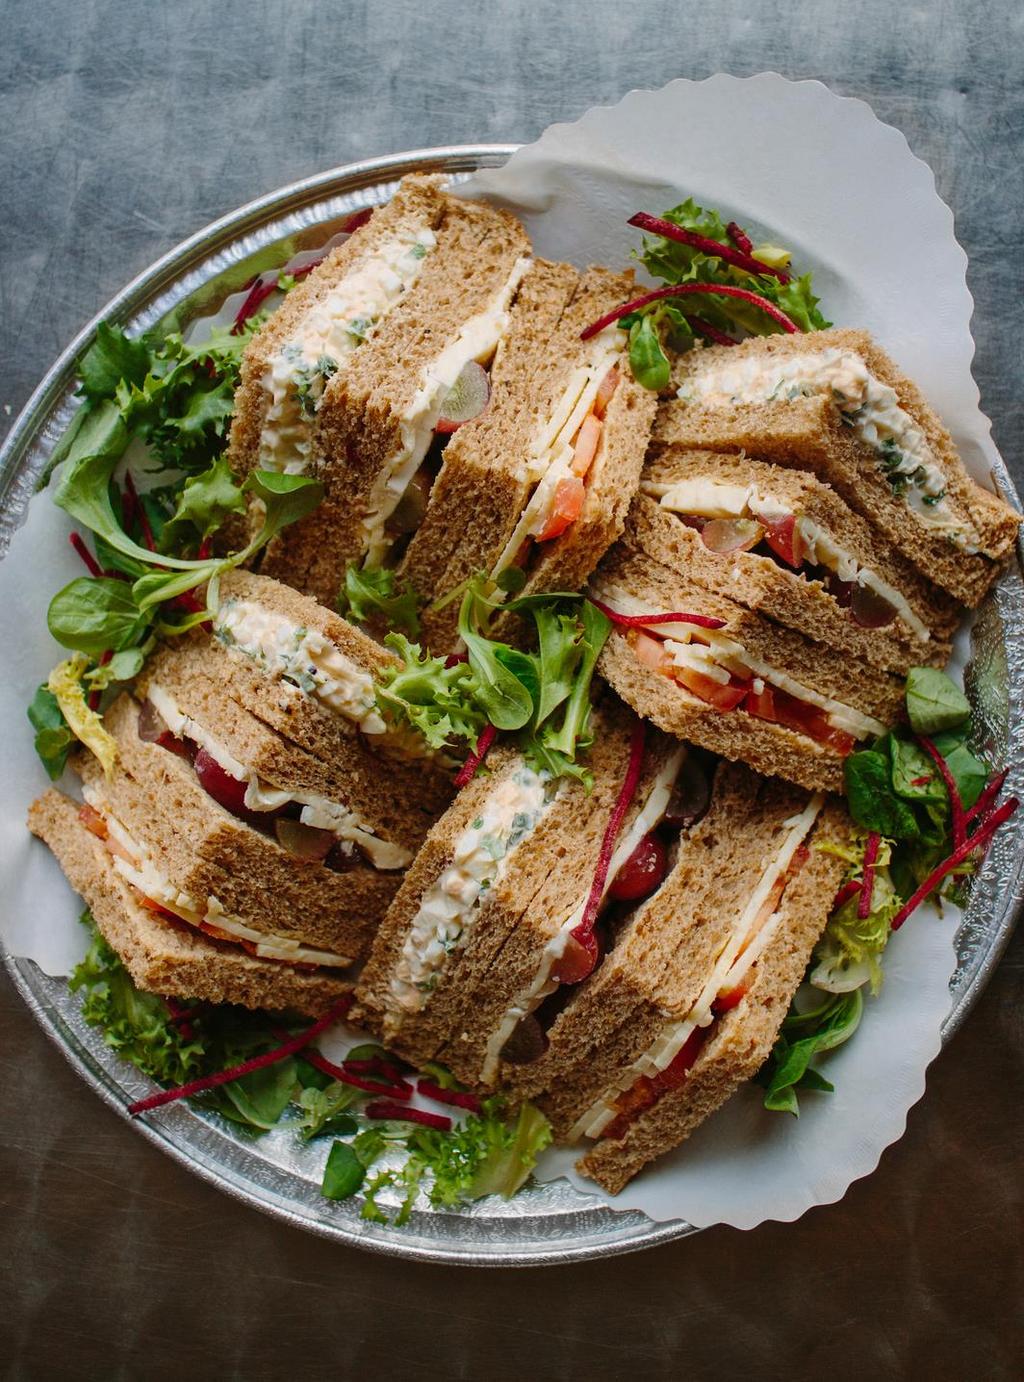 LUNCH WORKING LUNCH $45.00 PER PERSON Assorted Sandwich Platter Choice of Salad Kettle Chips EXCELLENT CHOICE LUNCH $50.